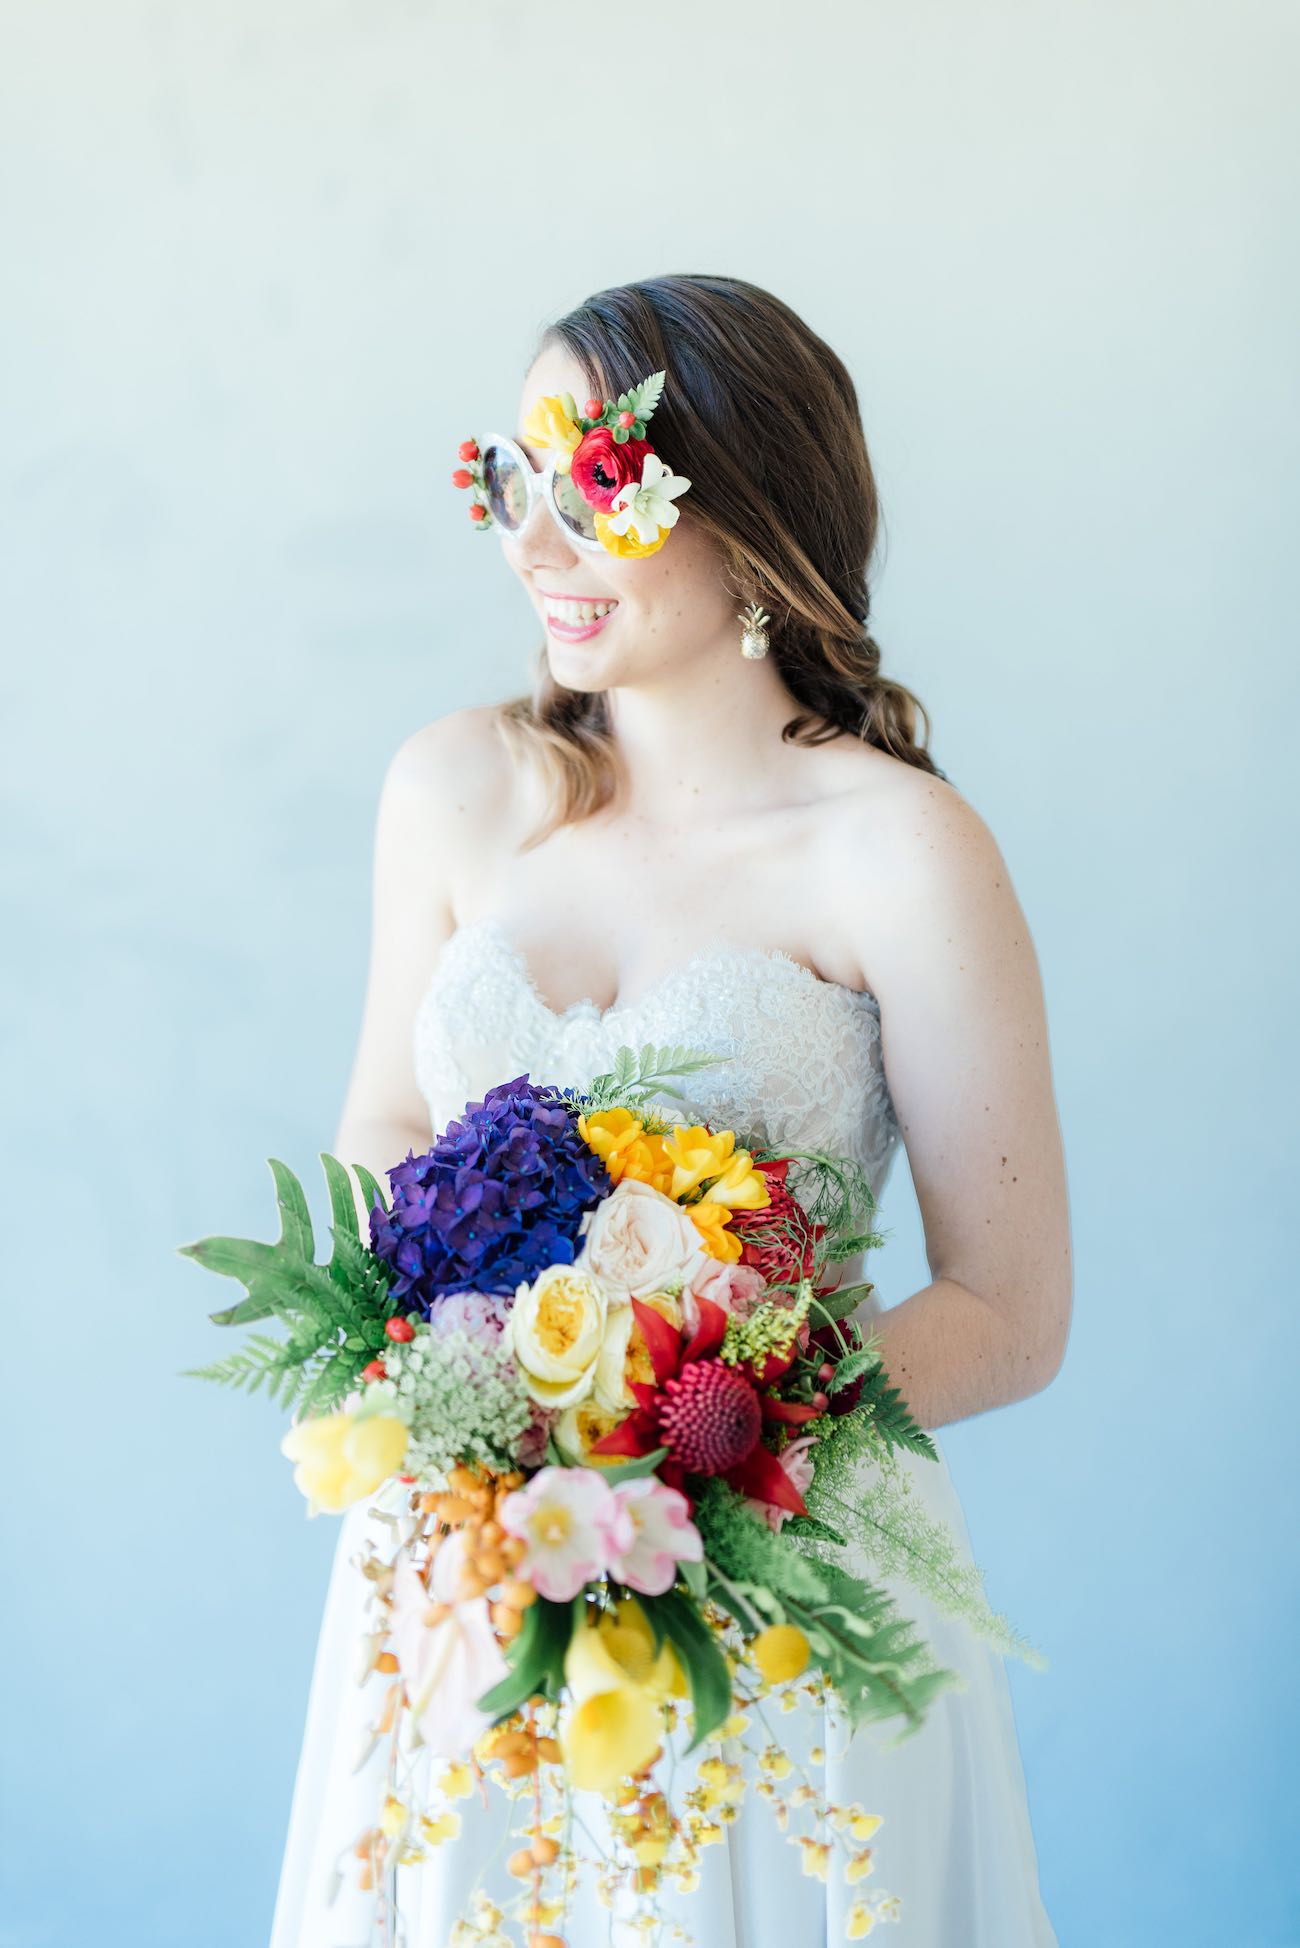 STUNNING tropical wedding bouquet made from a cascade of bright blue hydrangea, yellow lilies, ferns, tulips. roses, queen annes lace, billies balls, protea and beautiful blooms! Super cute "tutti frutti", Carmen Miranda style tropical flower crown for a tropical bride in bright colors. Fun and cute. Tropical Wedding Ideas photographed by Debbie Lourens Photography